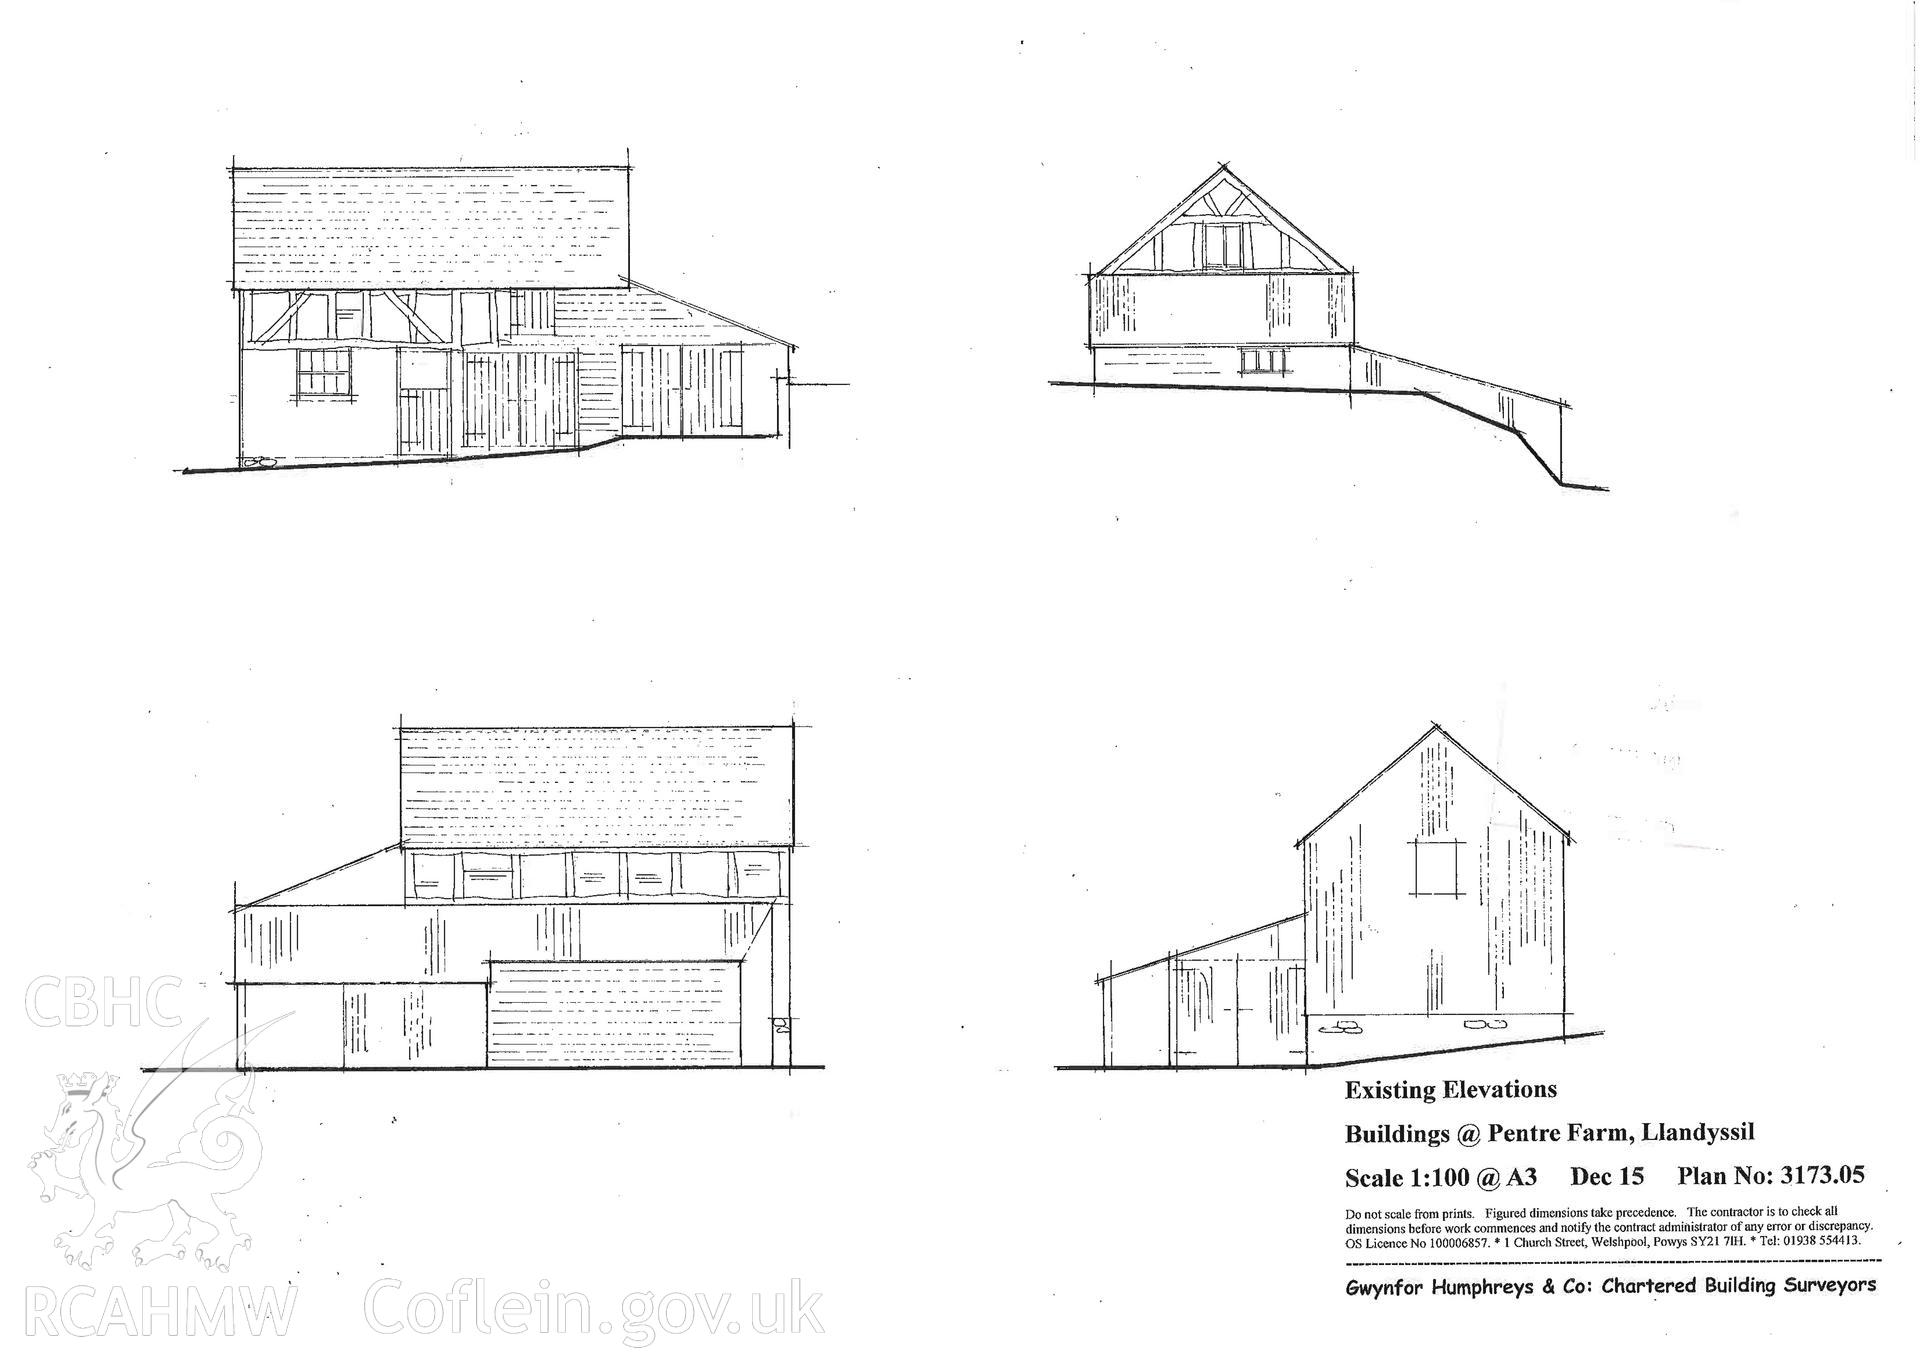 'Existing Elevation - Building B' used as report illustration for CPAT Project 2414: Pentre Barns, Llandyssil, Powys - Building Survey. Prepared by Kate Pack of Clwyd Powys Archaeological Trust, 2019. Report no. 1694.